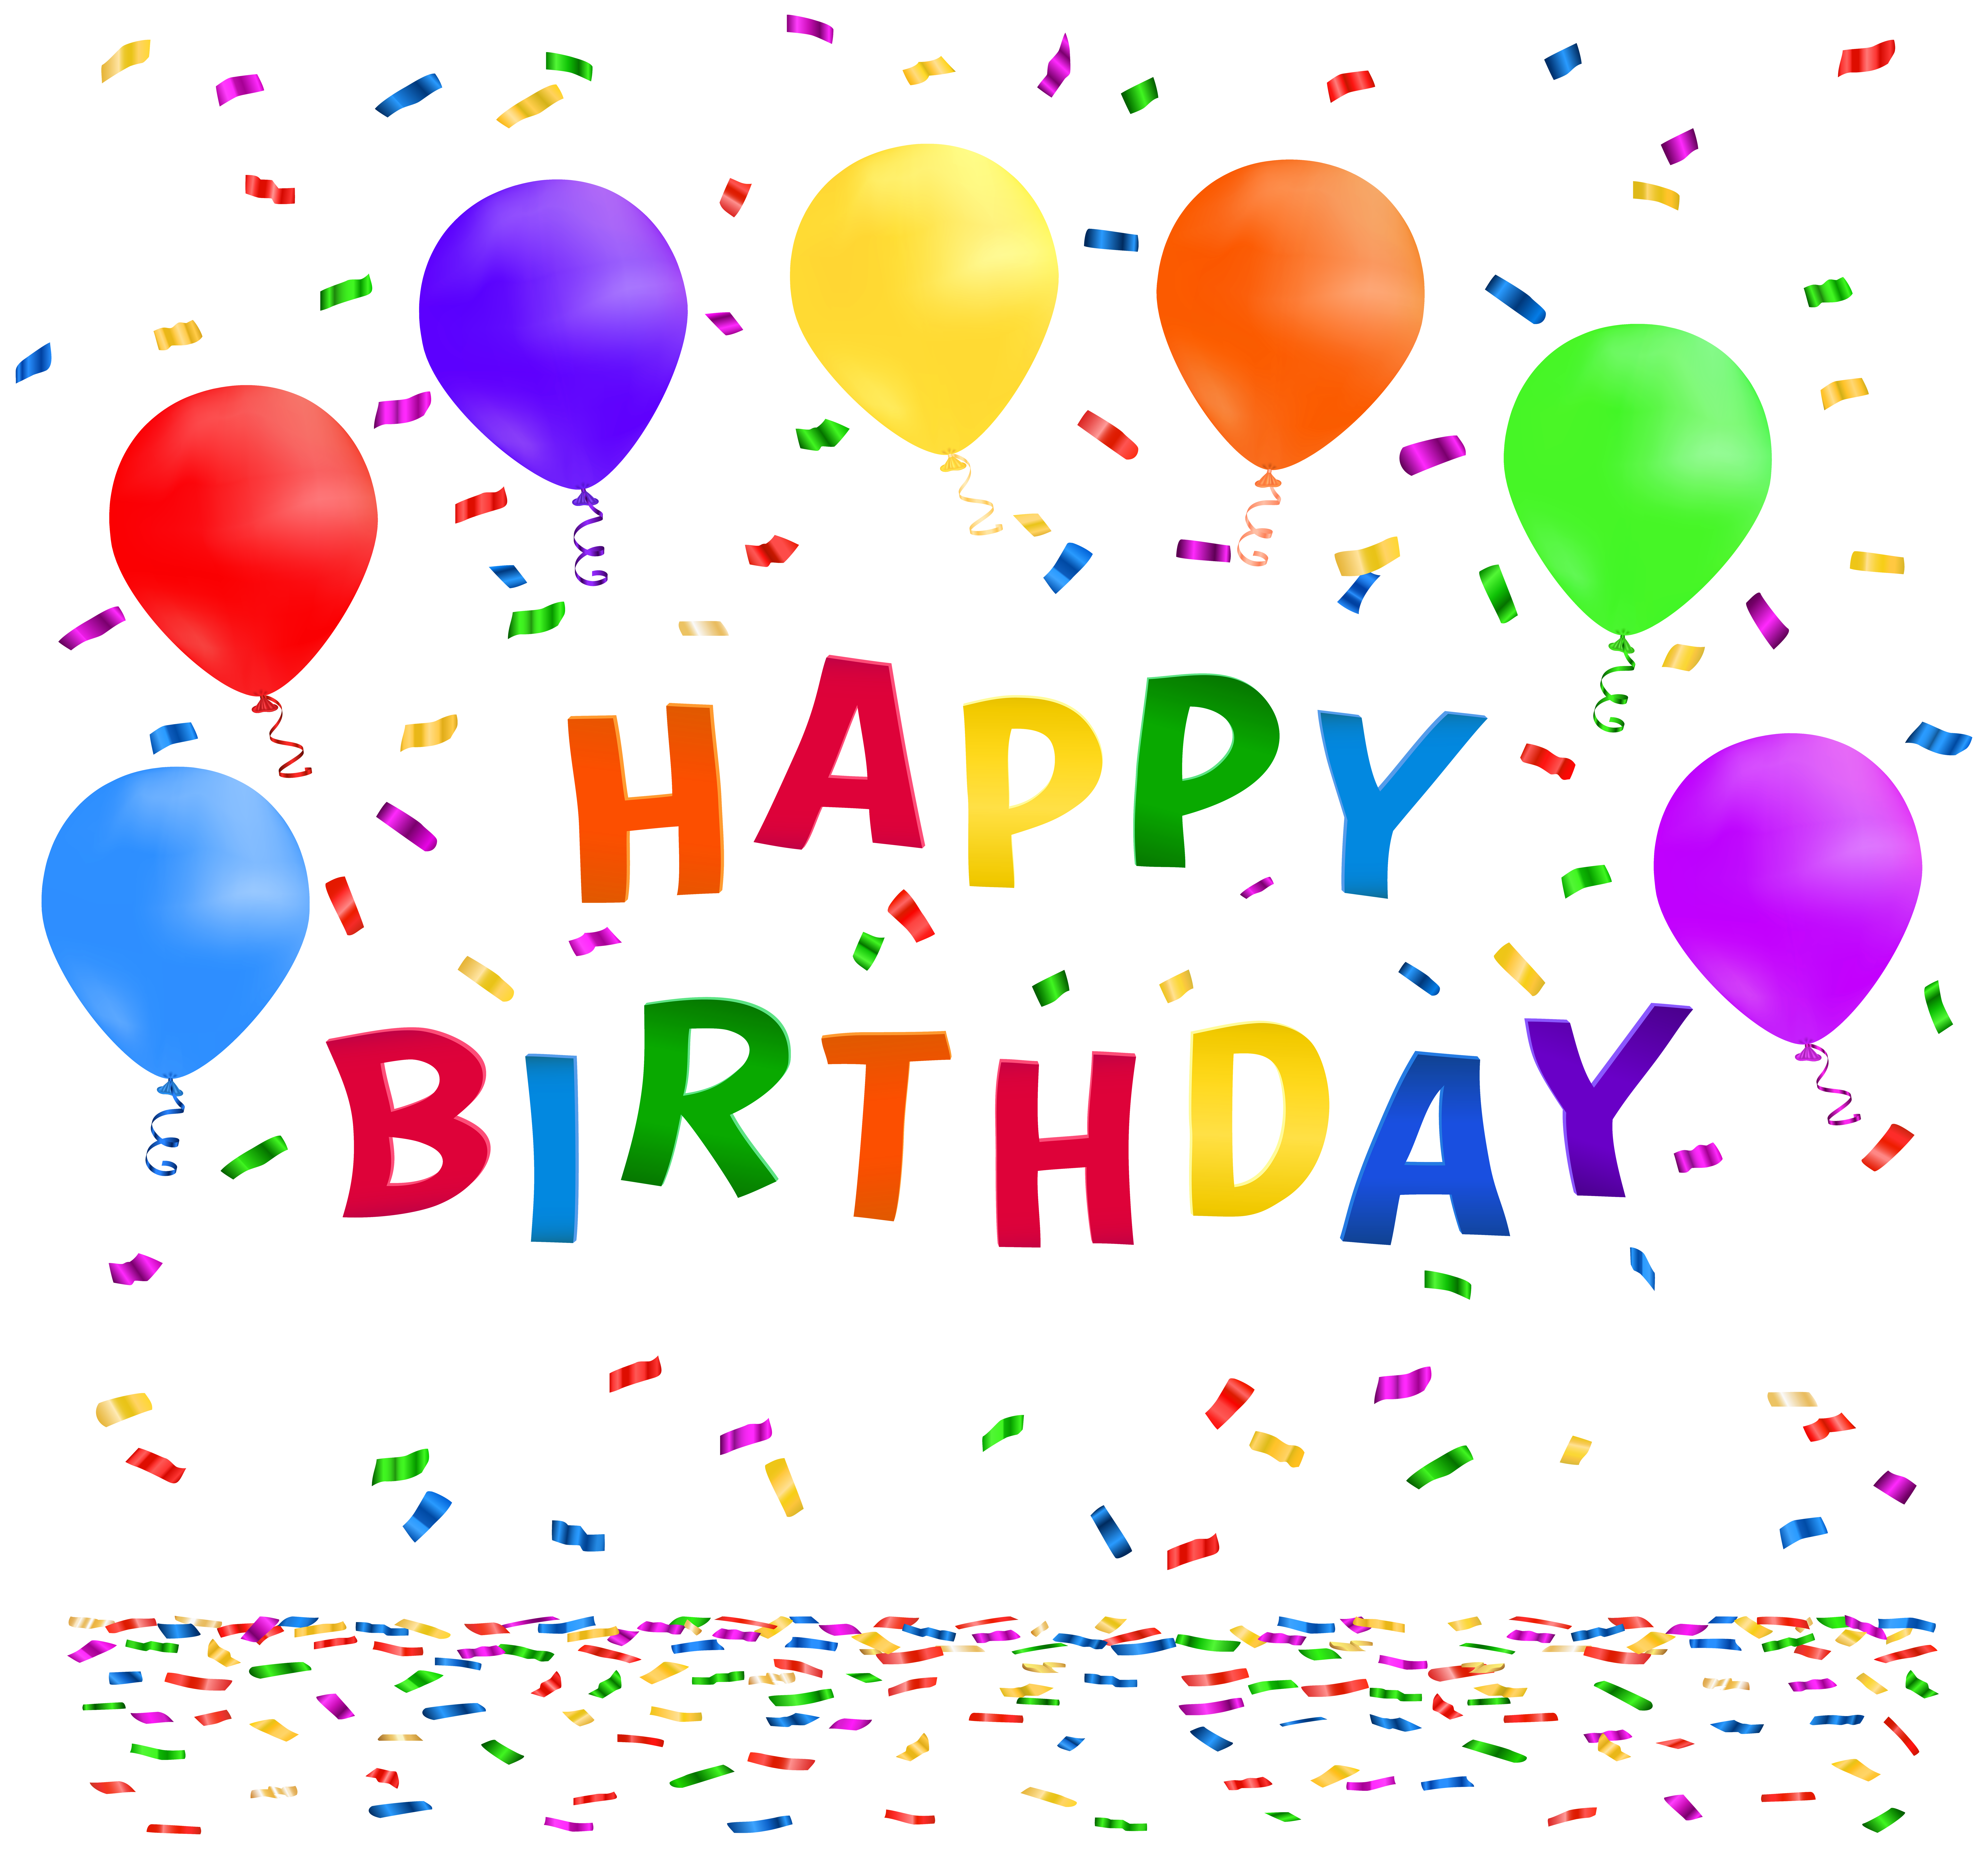 Happy Birthday With Confetti Image Hd Photos Clipart